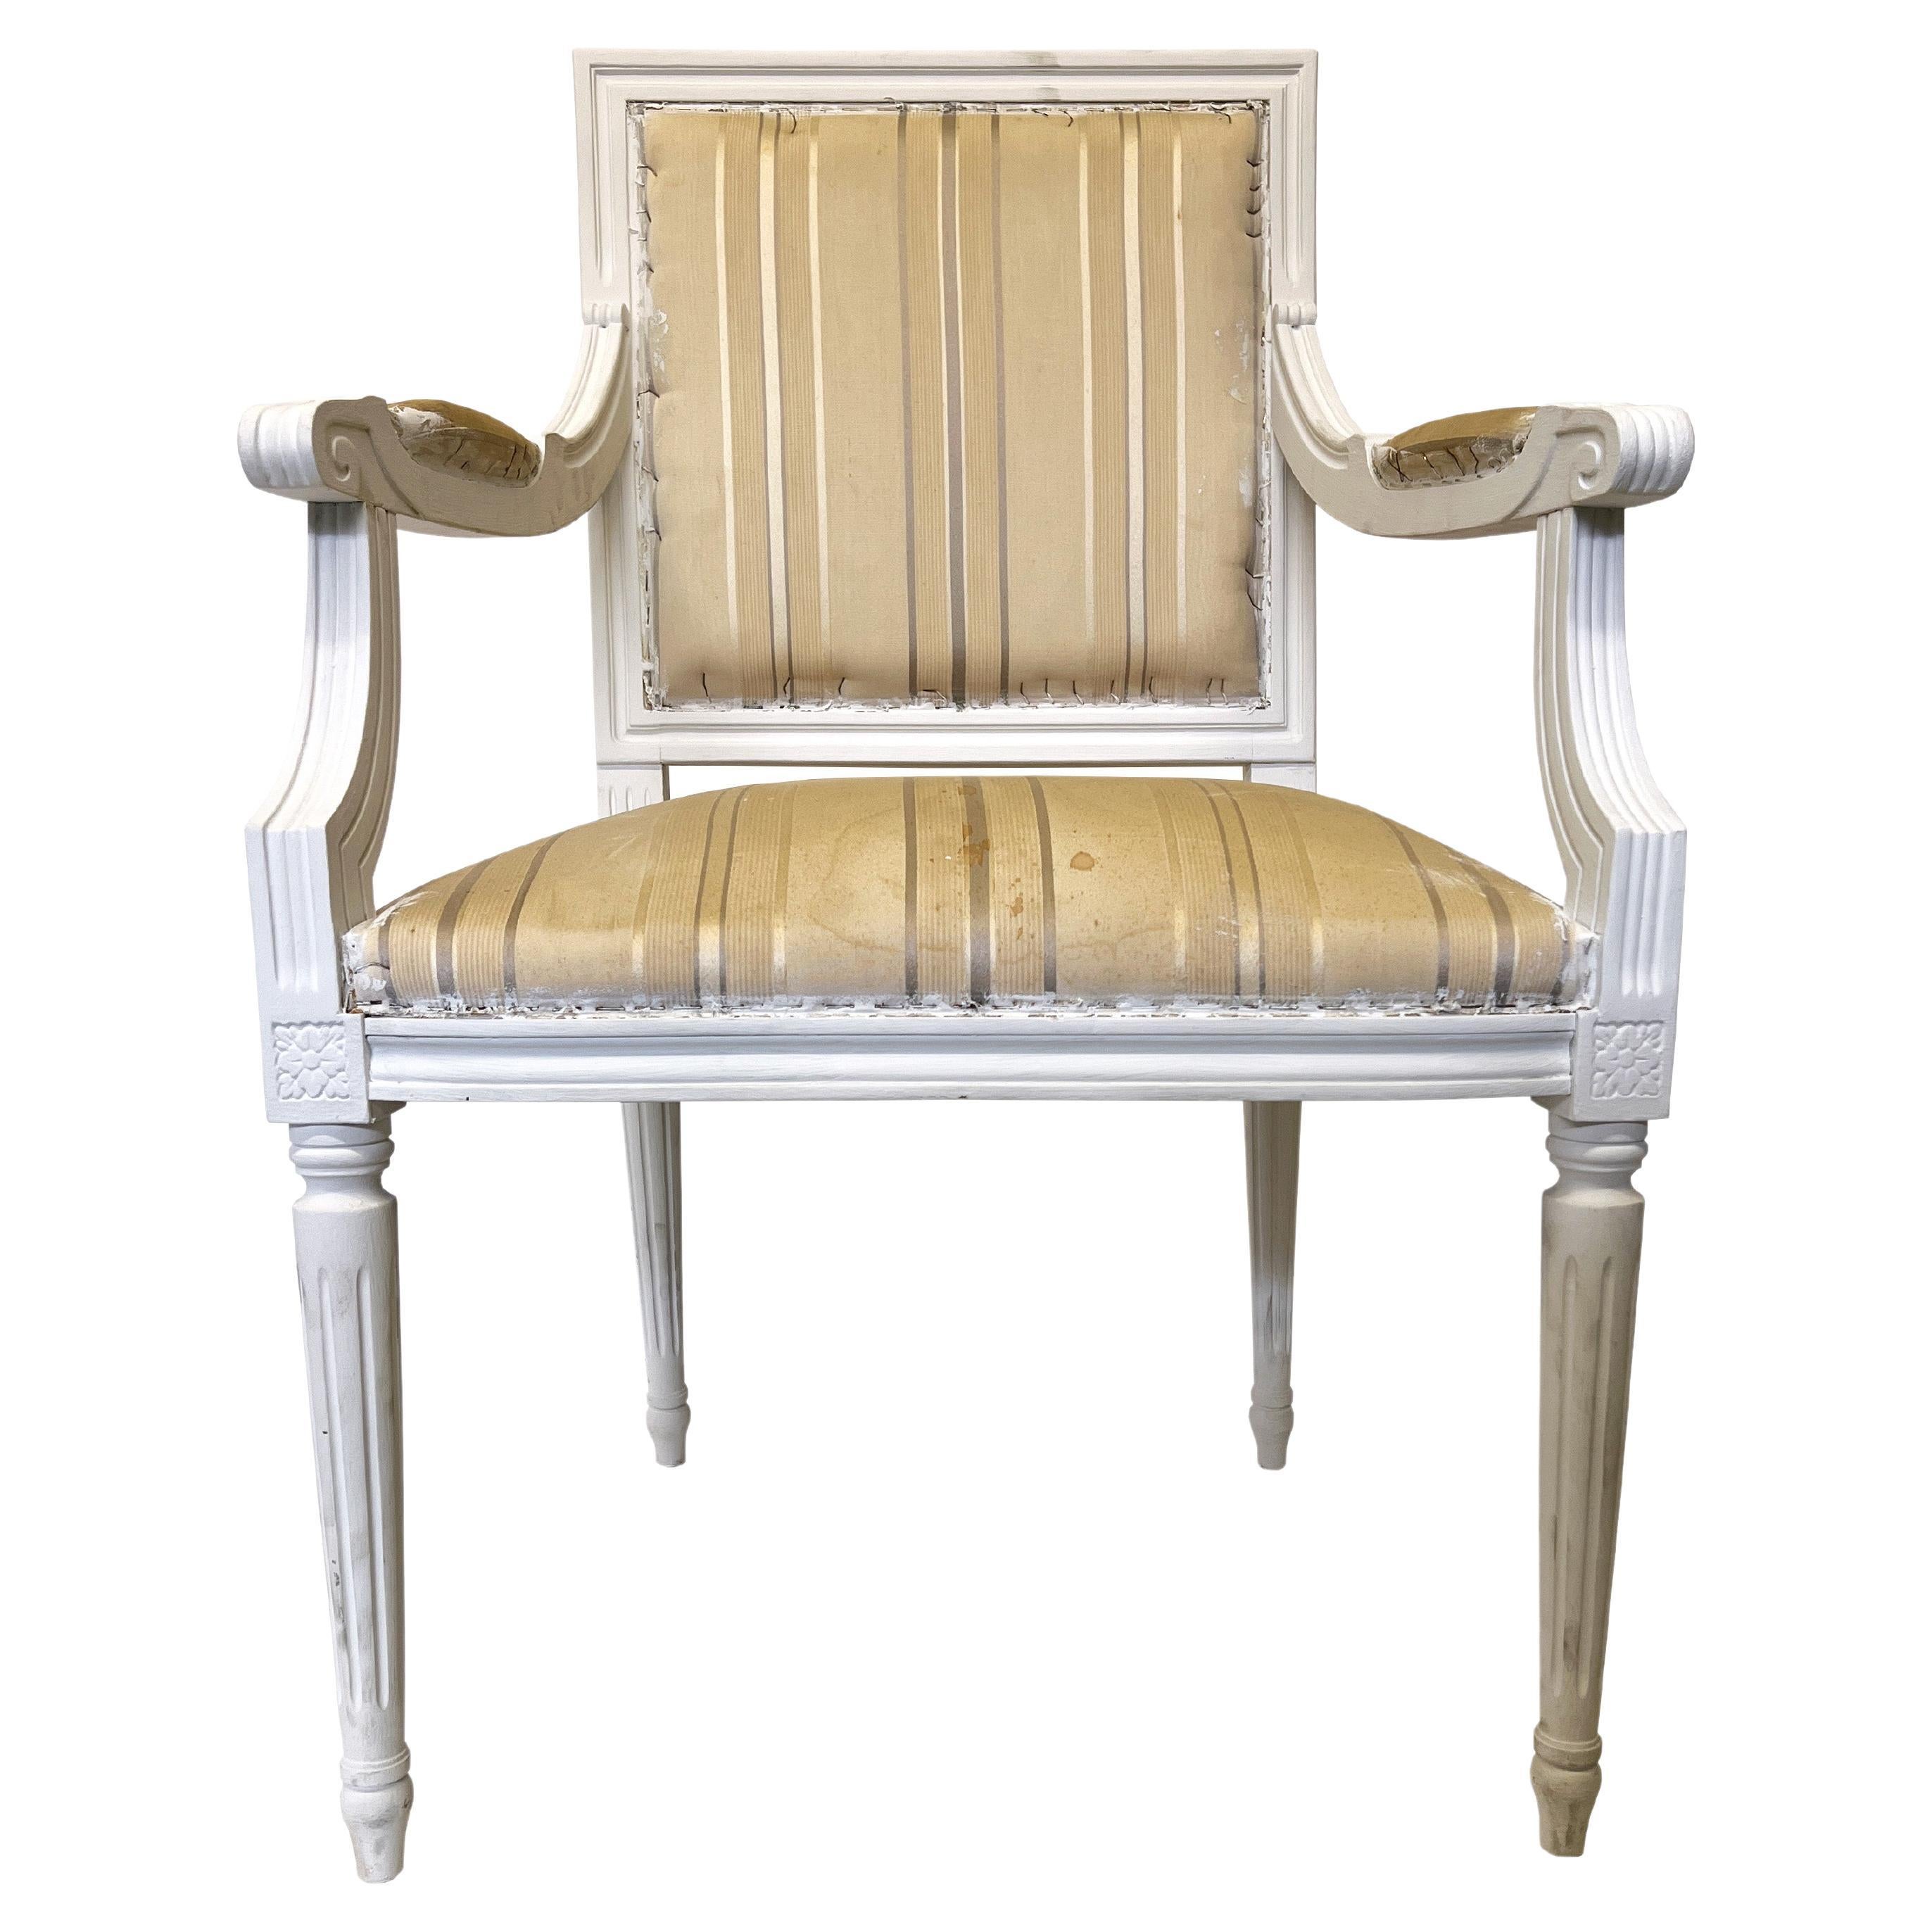 These French Louis XVI style armchairs or dining chairs have an elegant silhouette and a carved wooden frame upholstered in a striped fabric. The chair has a square backrest and seat carved with classicizing details. The white painted armchairs are